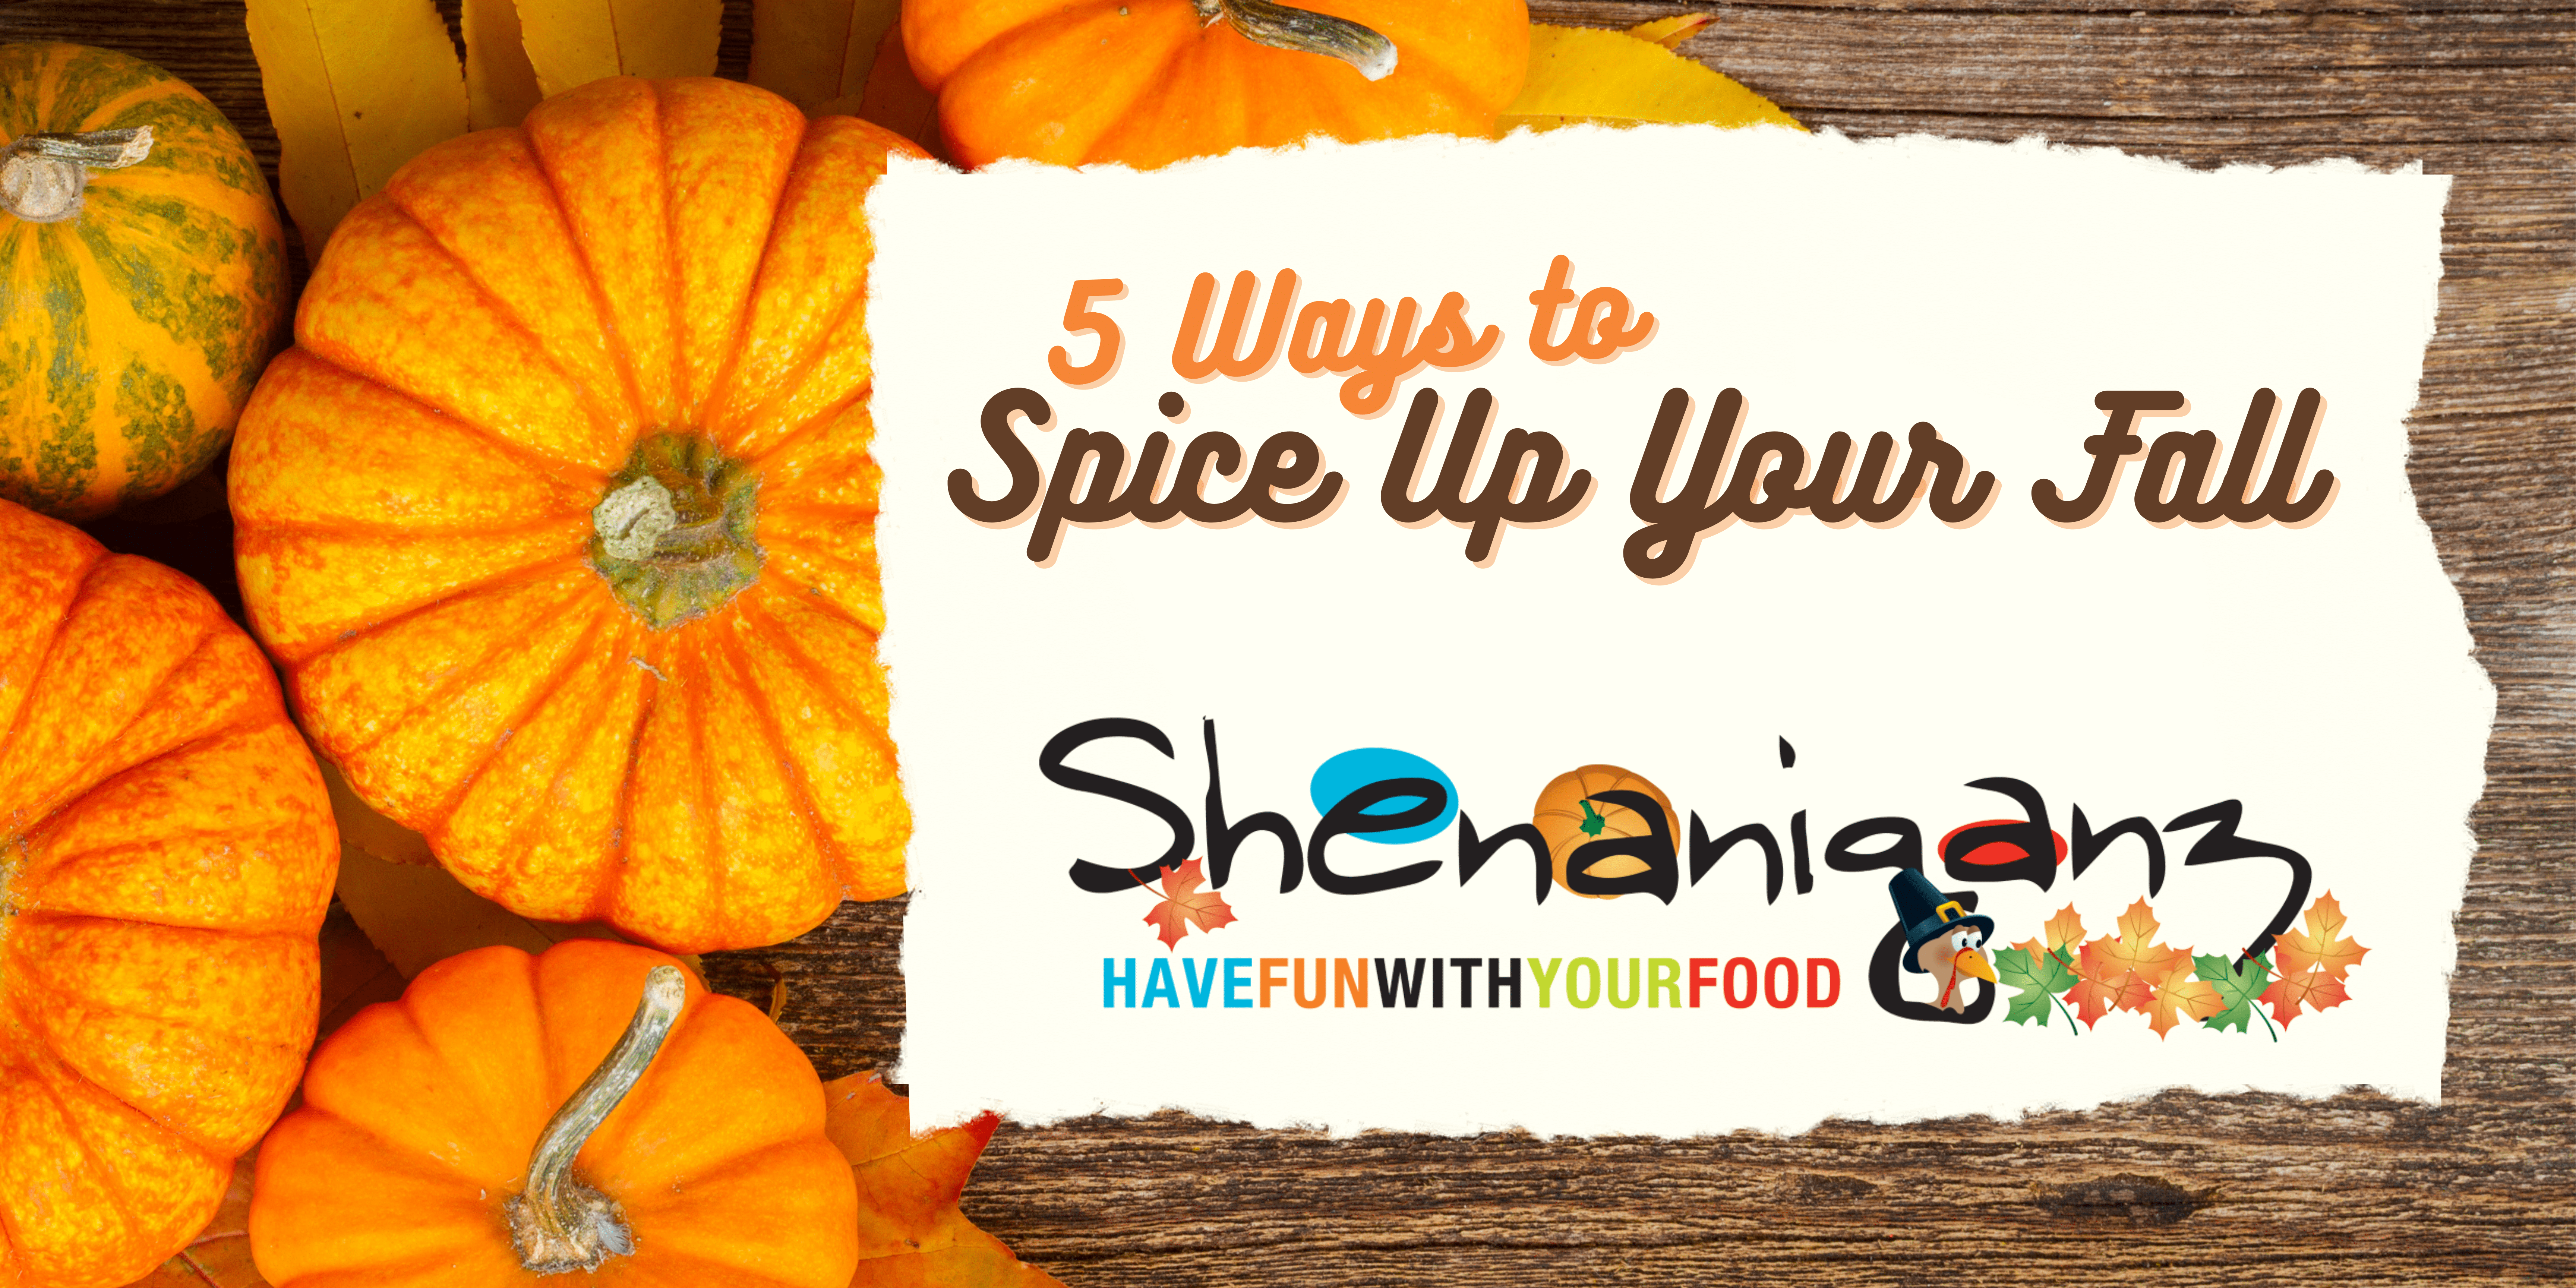 5 Ways to Spice Up Your Fall!